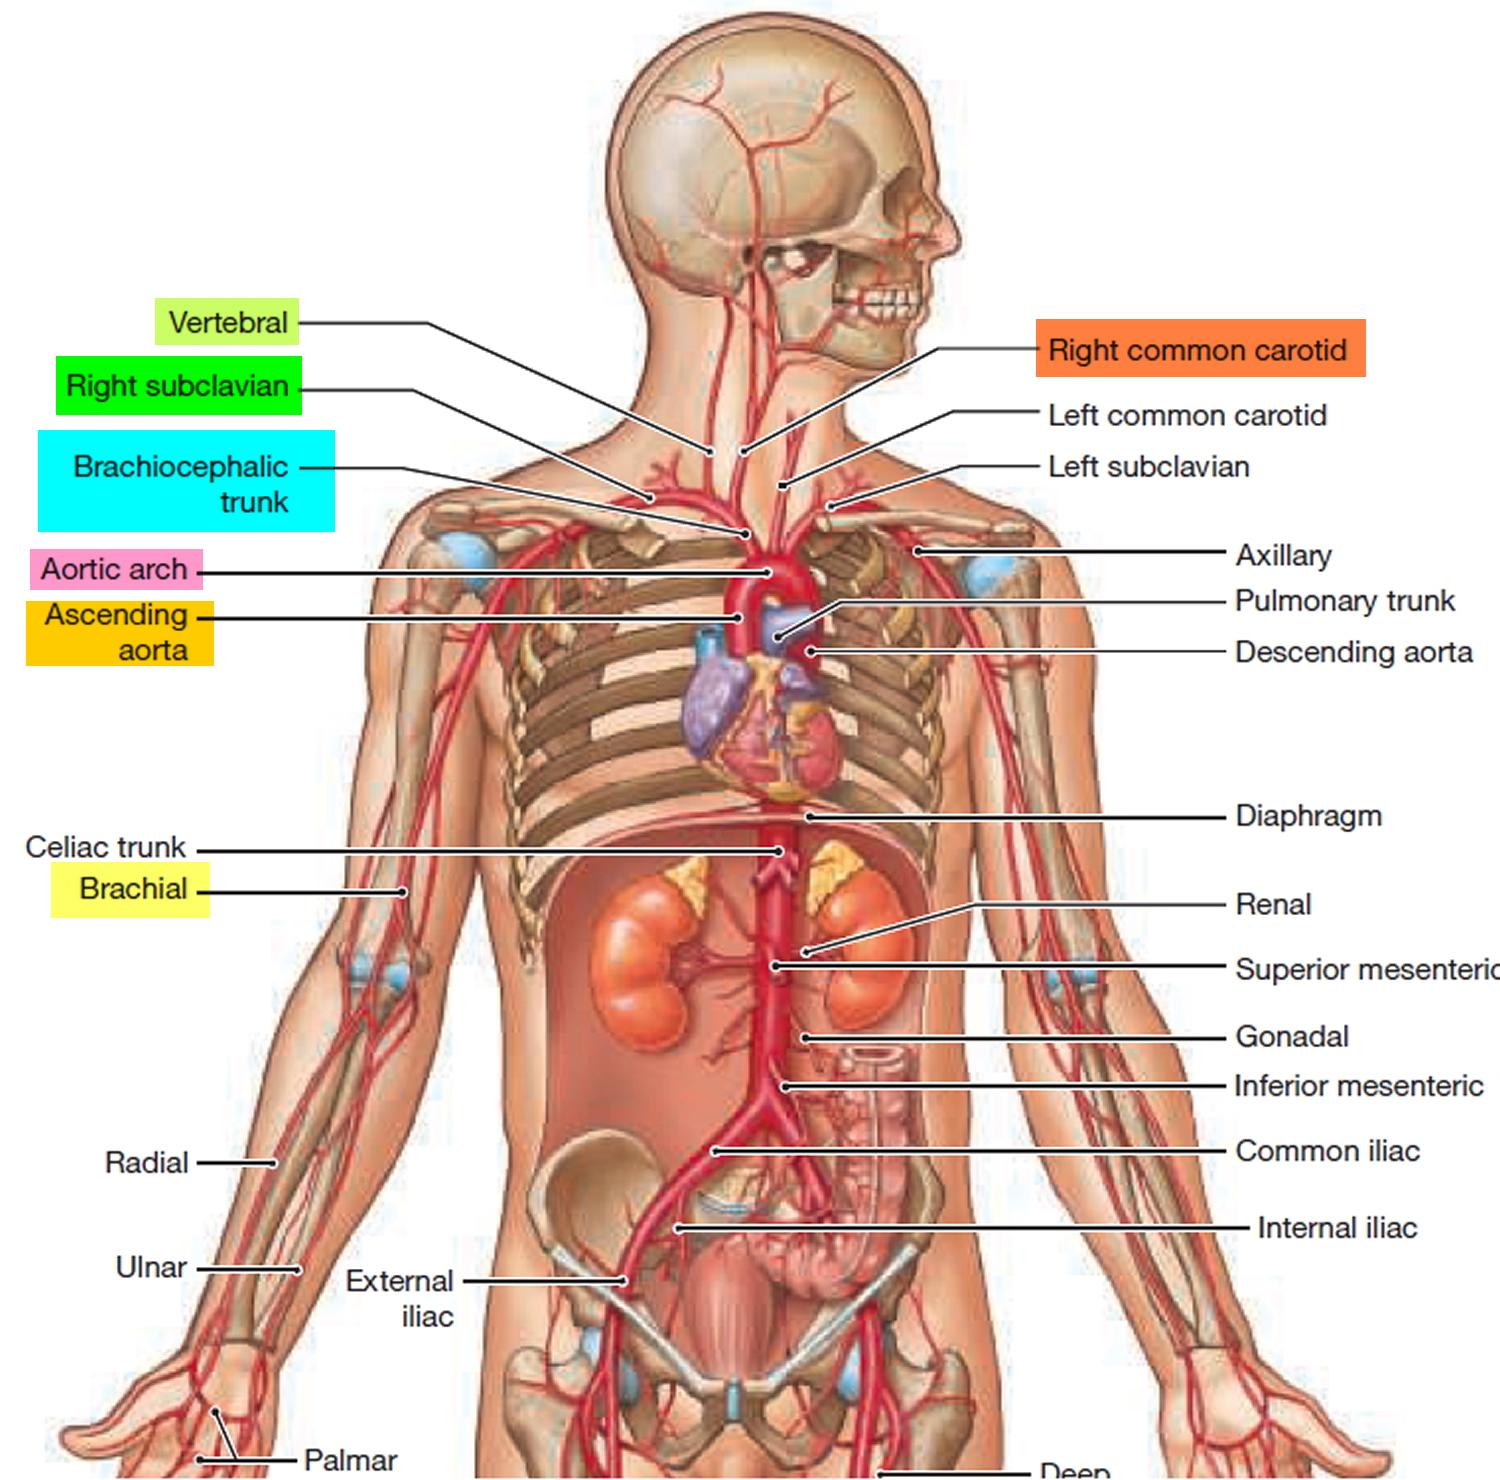 Brachiocephalic Artery and its branches - Function and Blood Supply